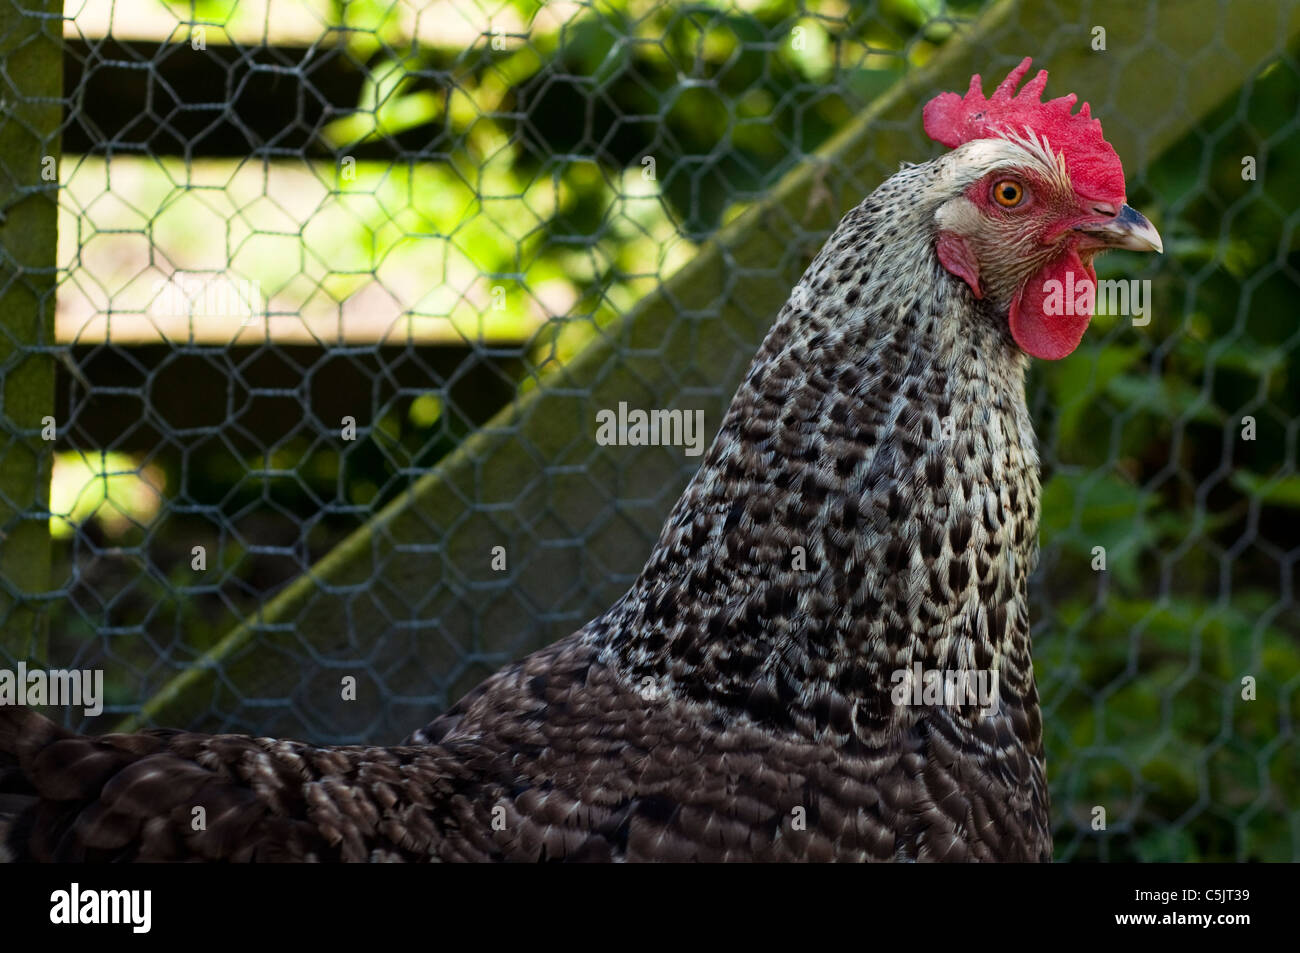 Speckled black and white hen or chicken outdoors in the chicken run in a backyard in England. Stock Photo